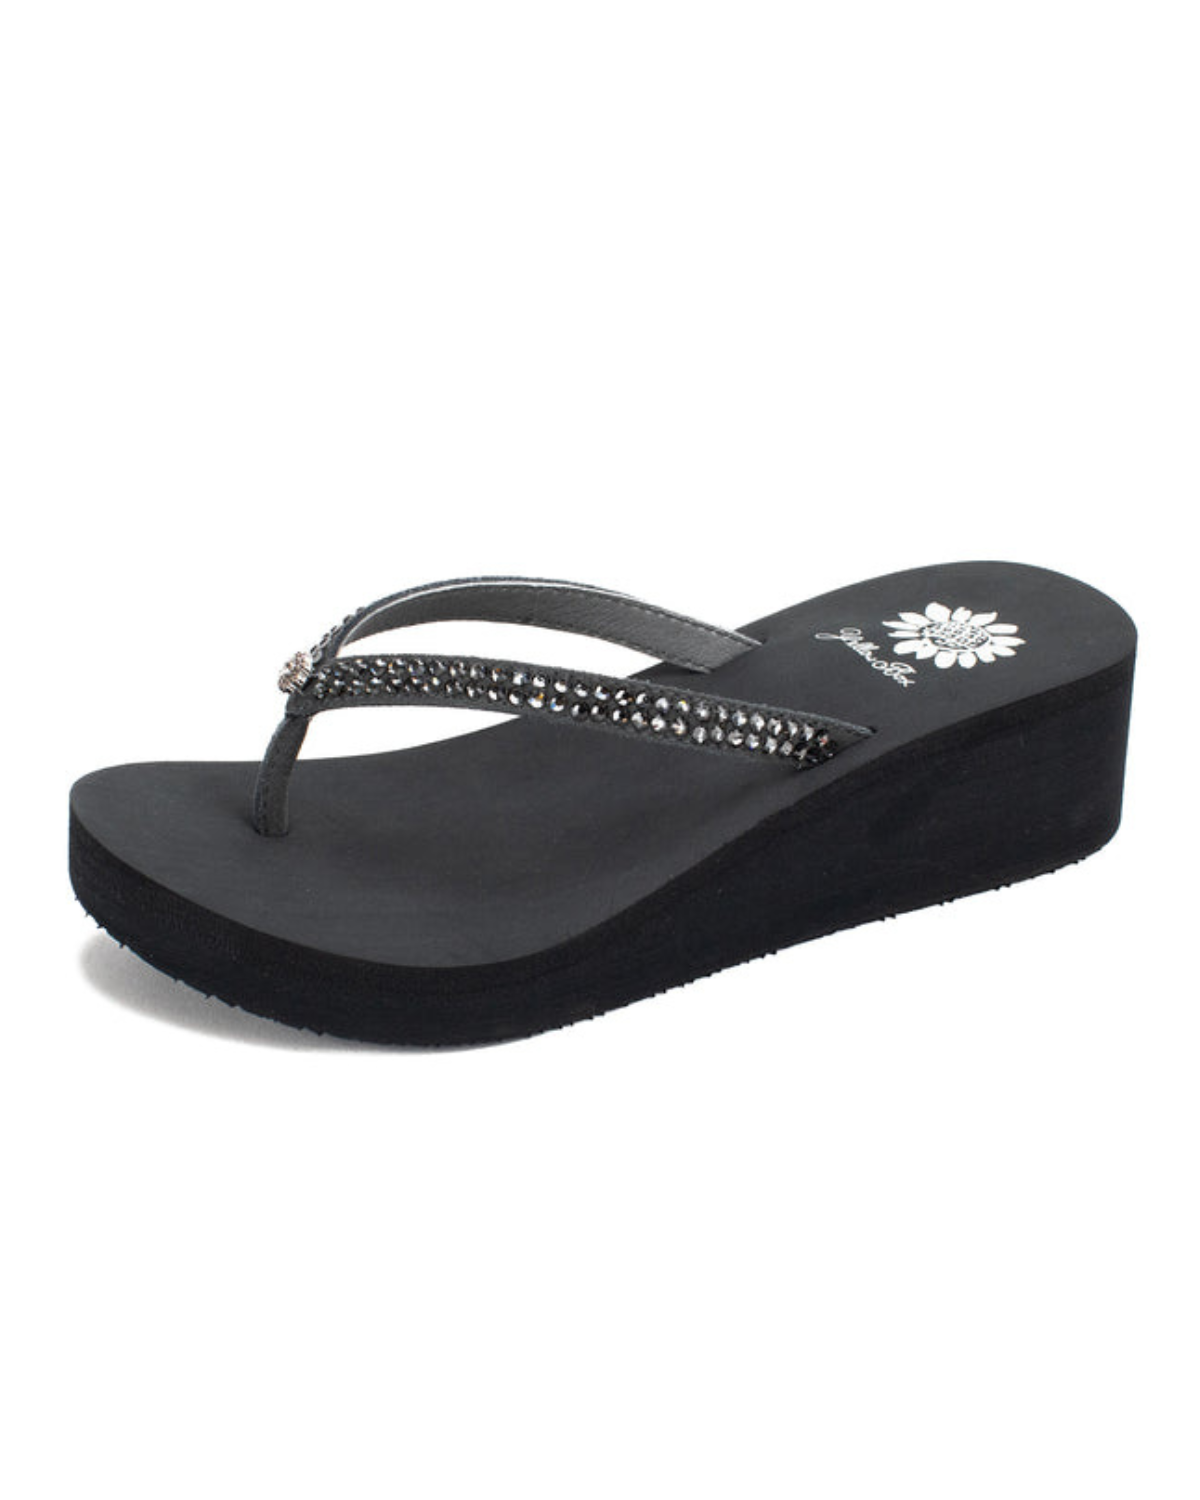 Front side view of a grey wedge sandal with rhinestones on the strap on a white backdrop. The sandal has 1.75" heel height and 0.75" platform height.